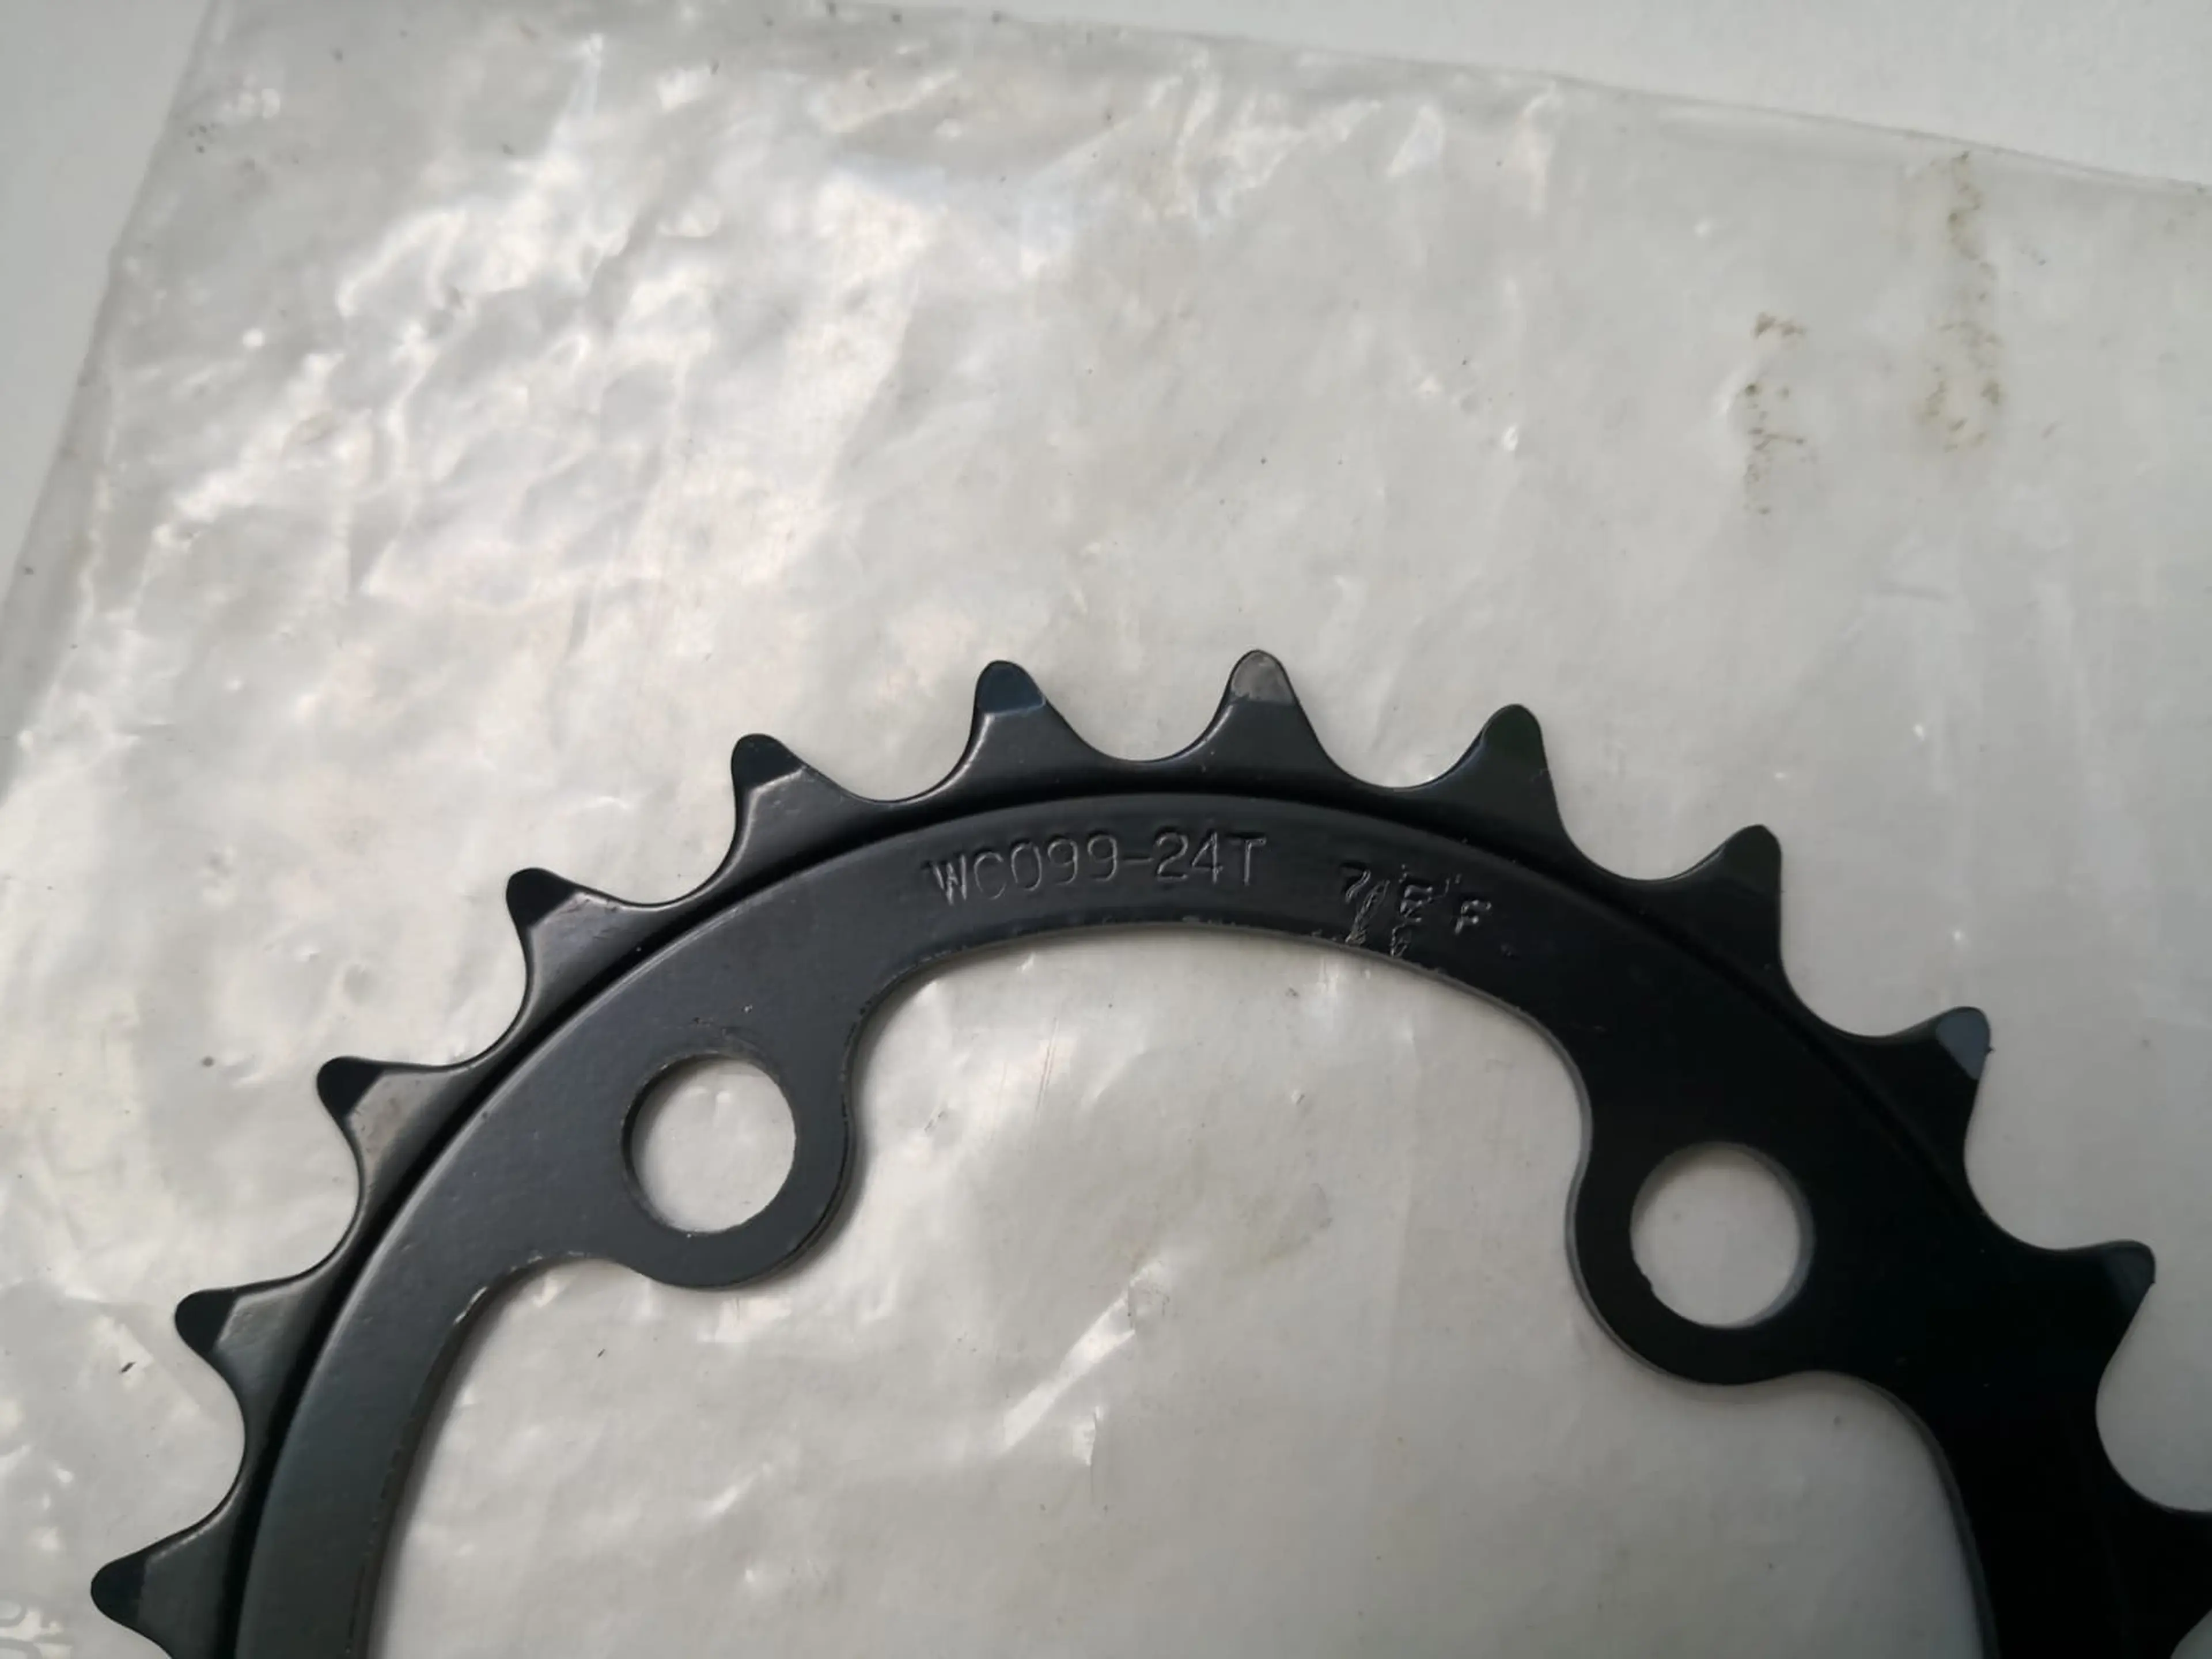 Image Foaie /chainring fsa wc099-24t